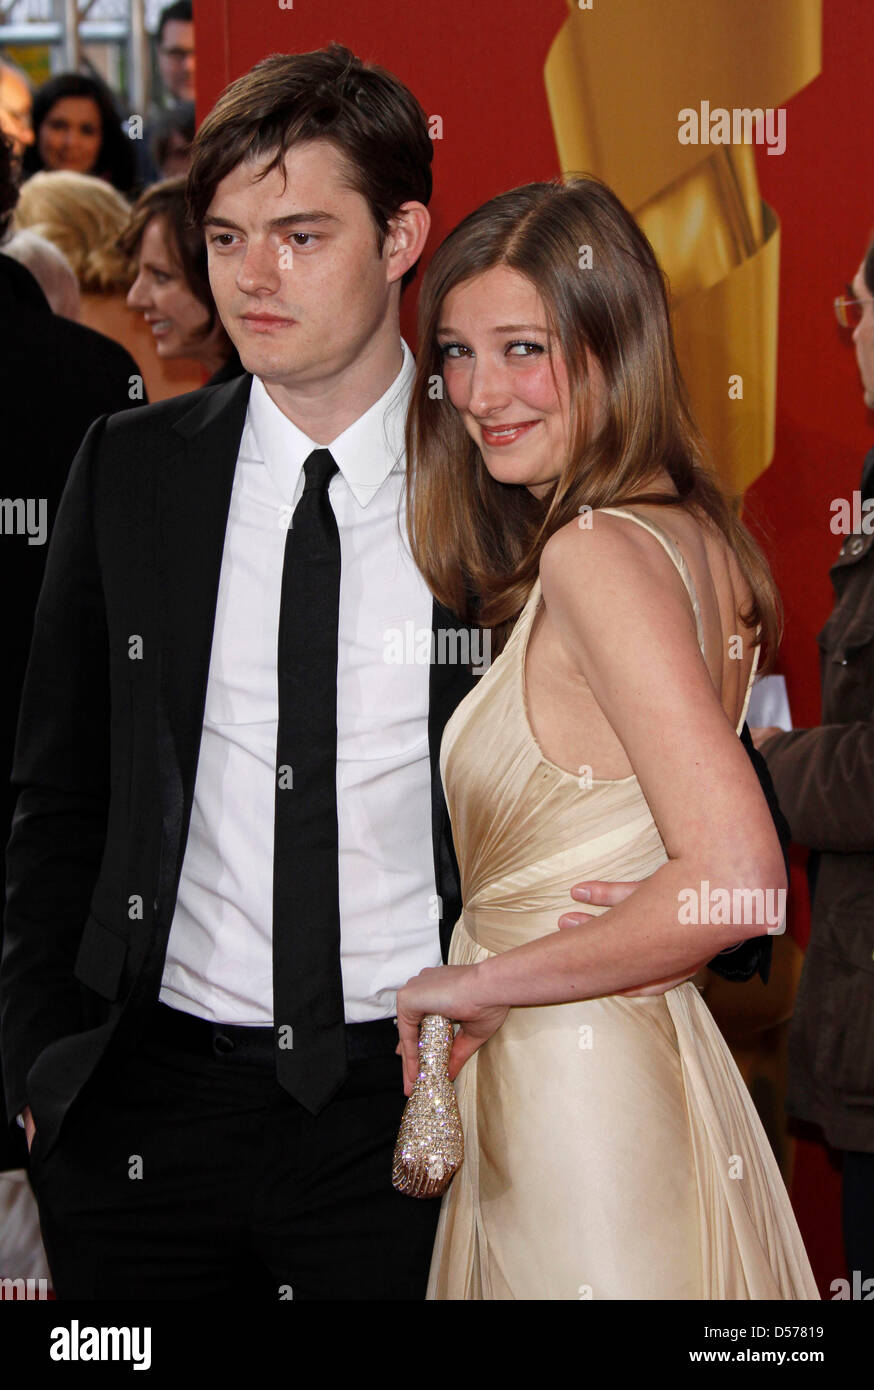 Actor couple Alexandra Maria Lara and Sam Riley arrive at the German Film Award Ceremony ''Lola'' at Friedrichspalast in Berlin, Germany, 23 April 2010. Winners were honoured in 16 different categories at the 60th anniversary of the German Film Awards. Photo: Hubert Boesl Stock Photo